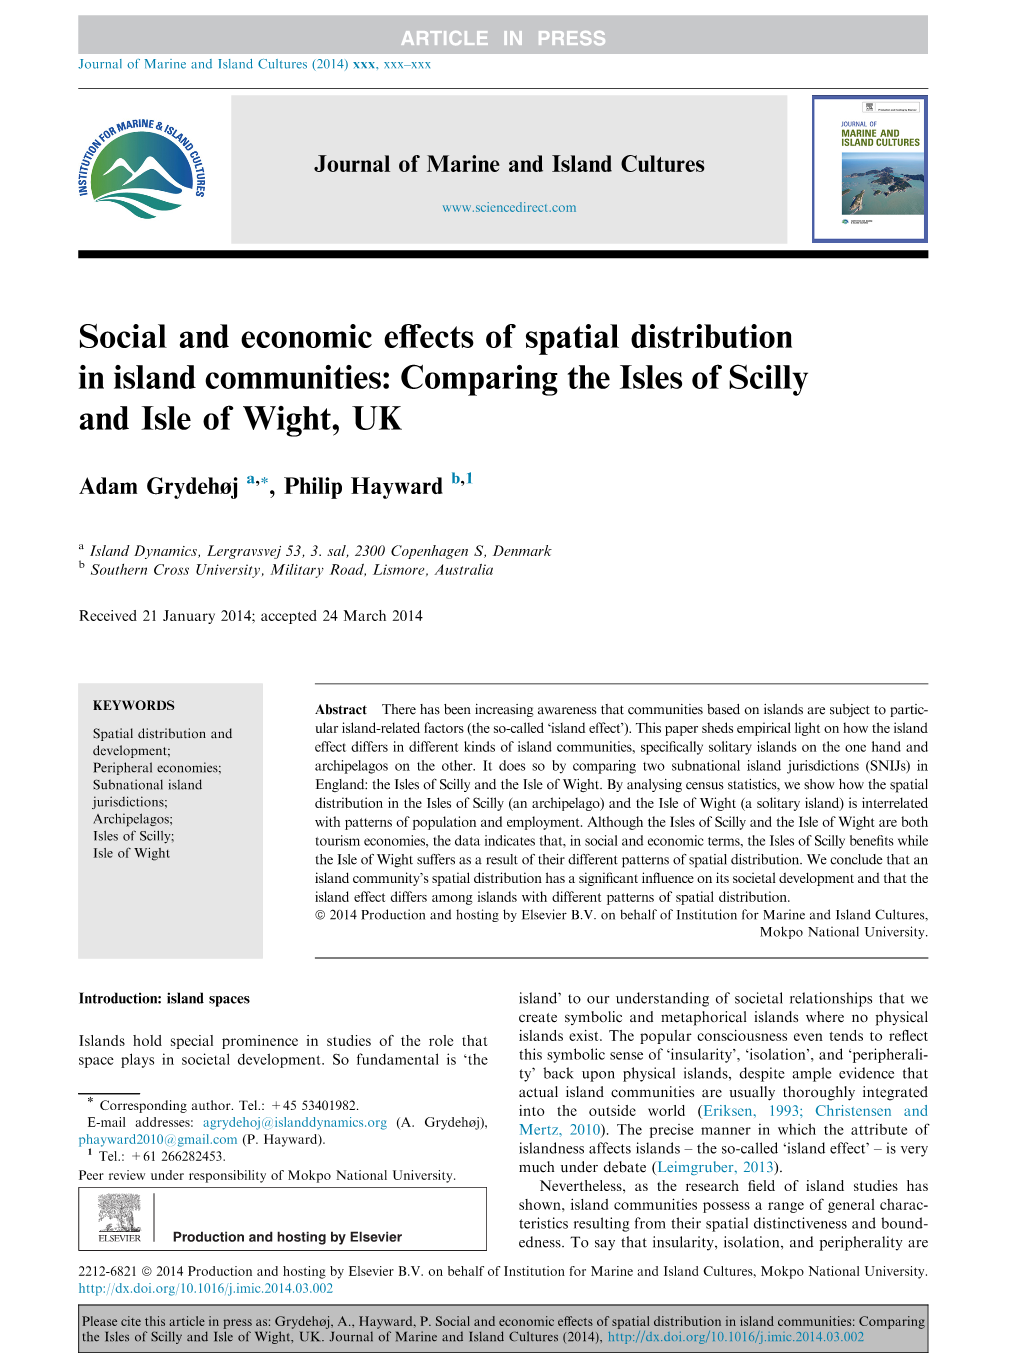 Social and Economic Effects of Spatial Distribution in Island Communities: Comparing the Isles of Scilly and Isle of Wight, UK3